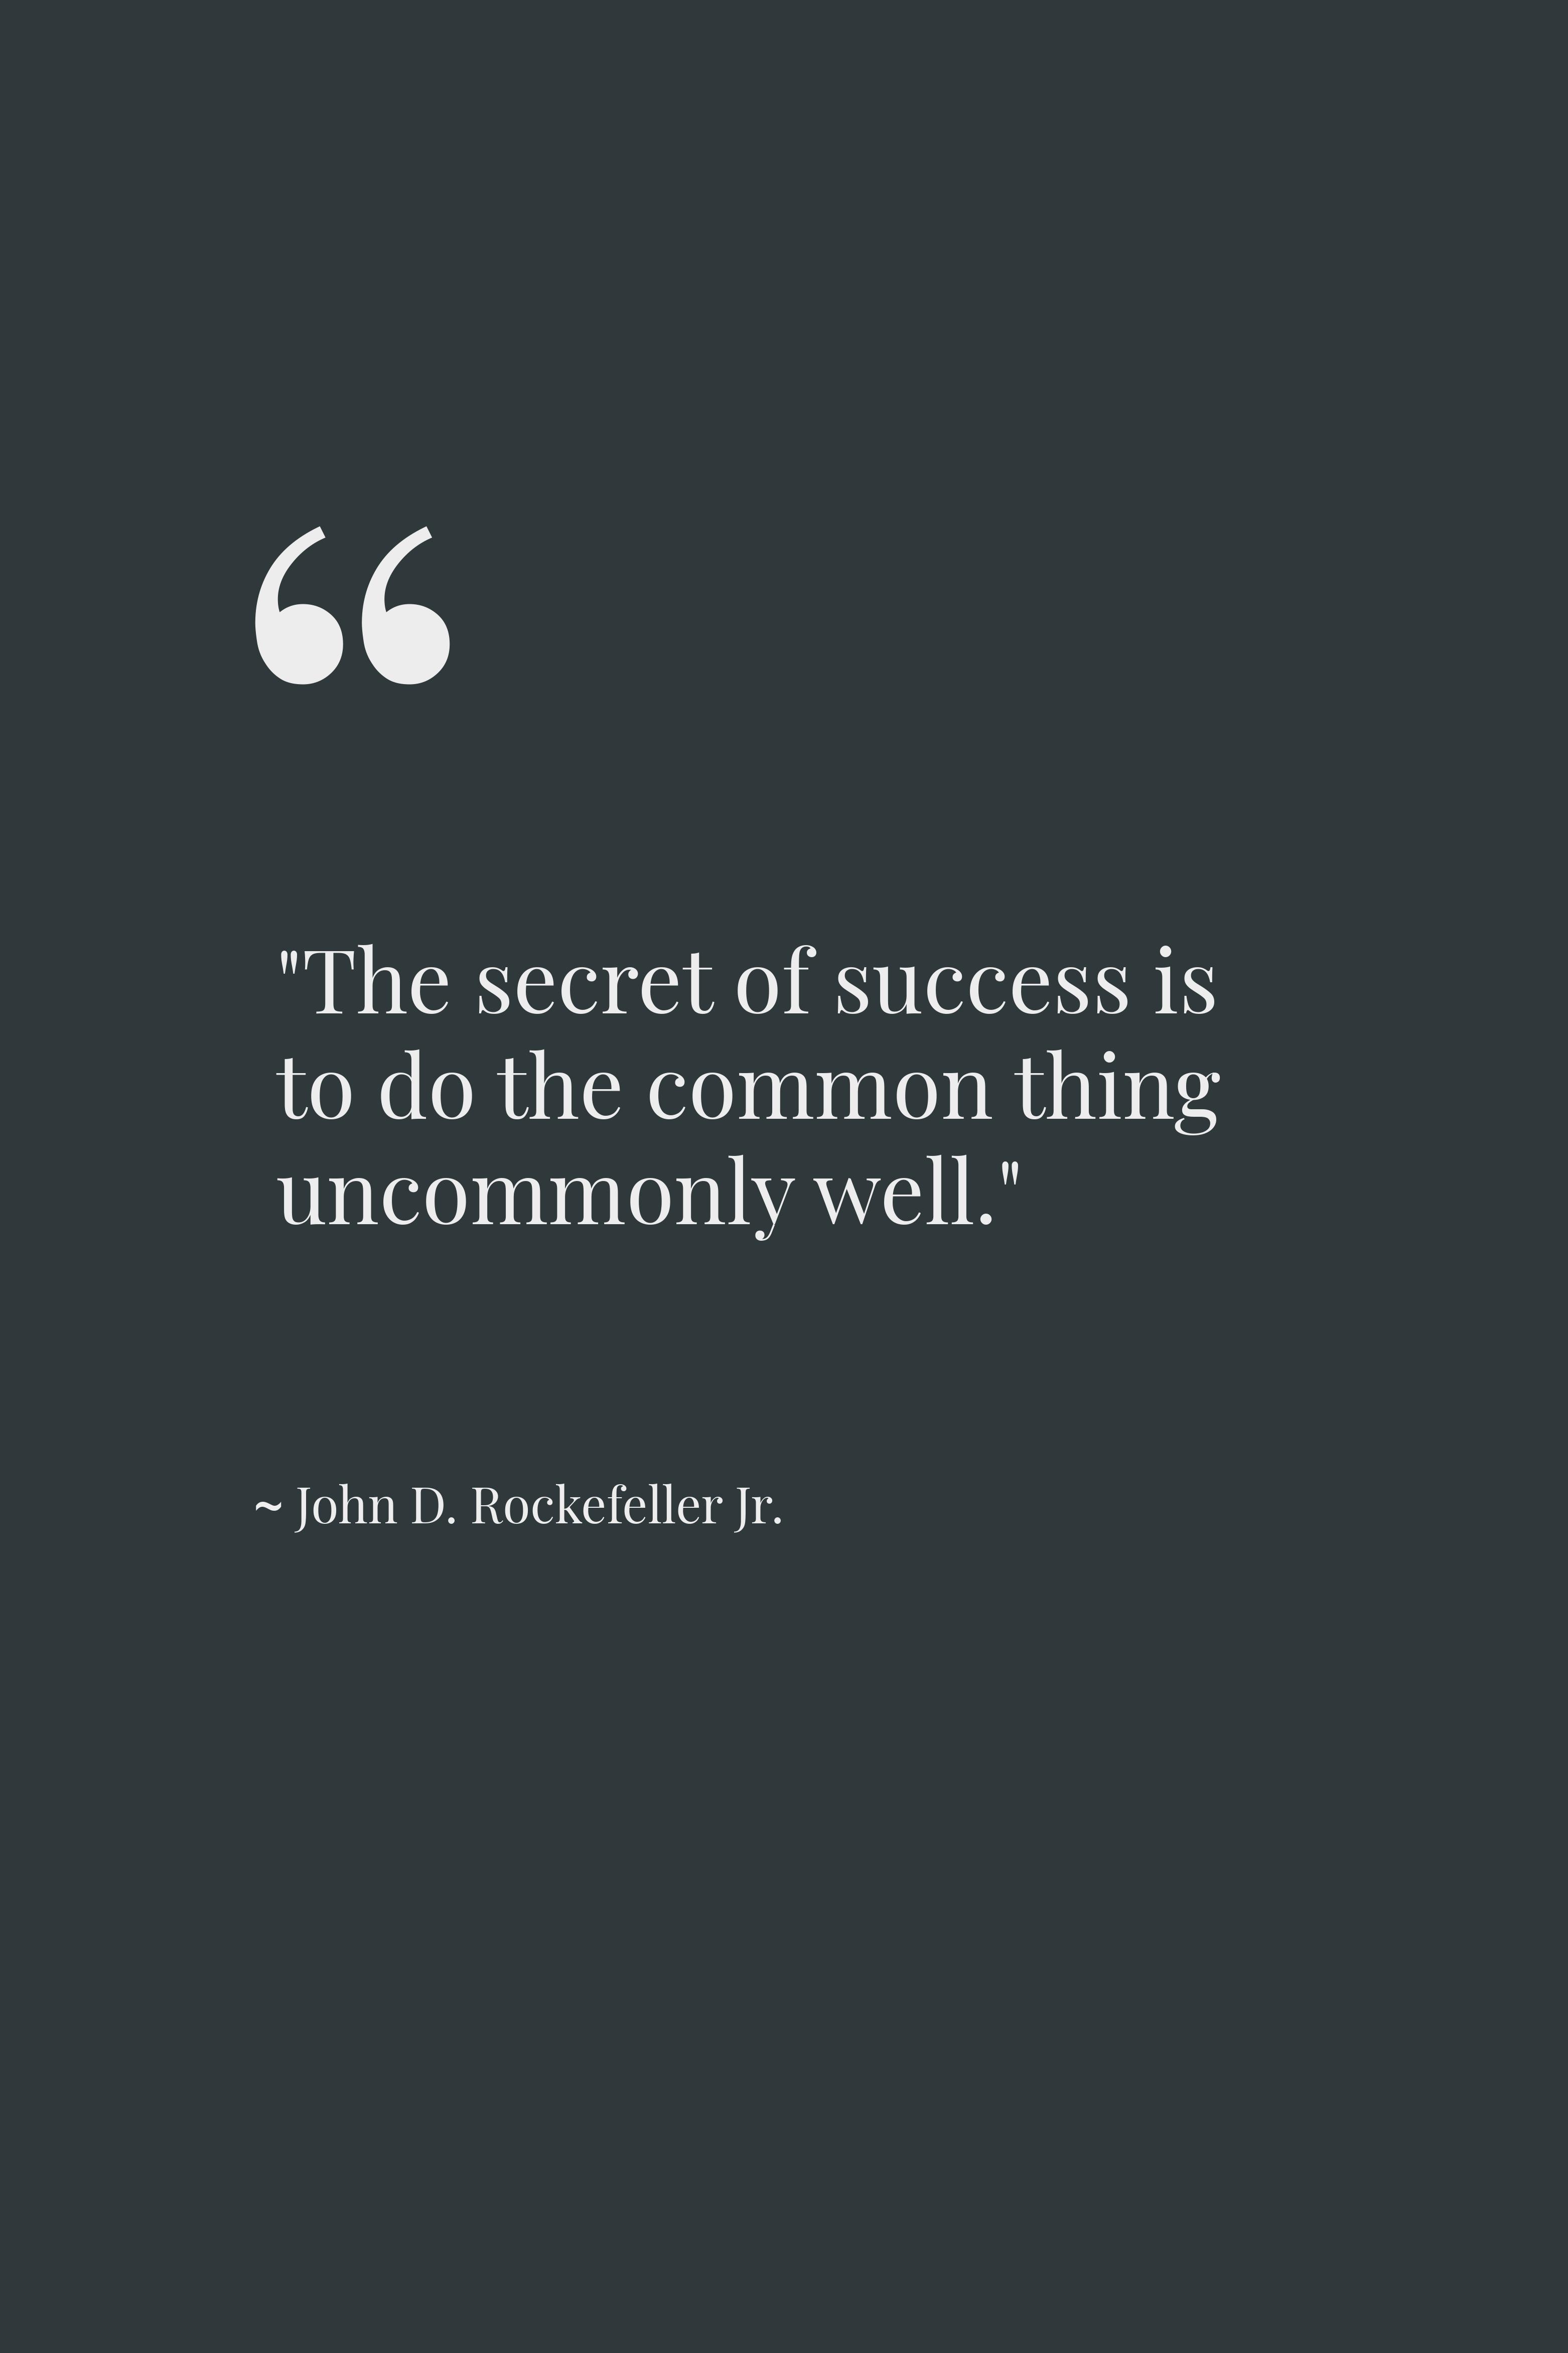 The secret of success is to do the common thing uncommonly well. ~ John D. Rockefeller Jr.